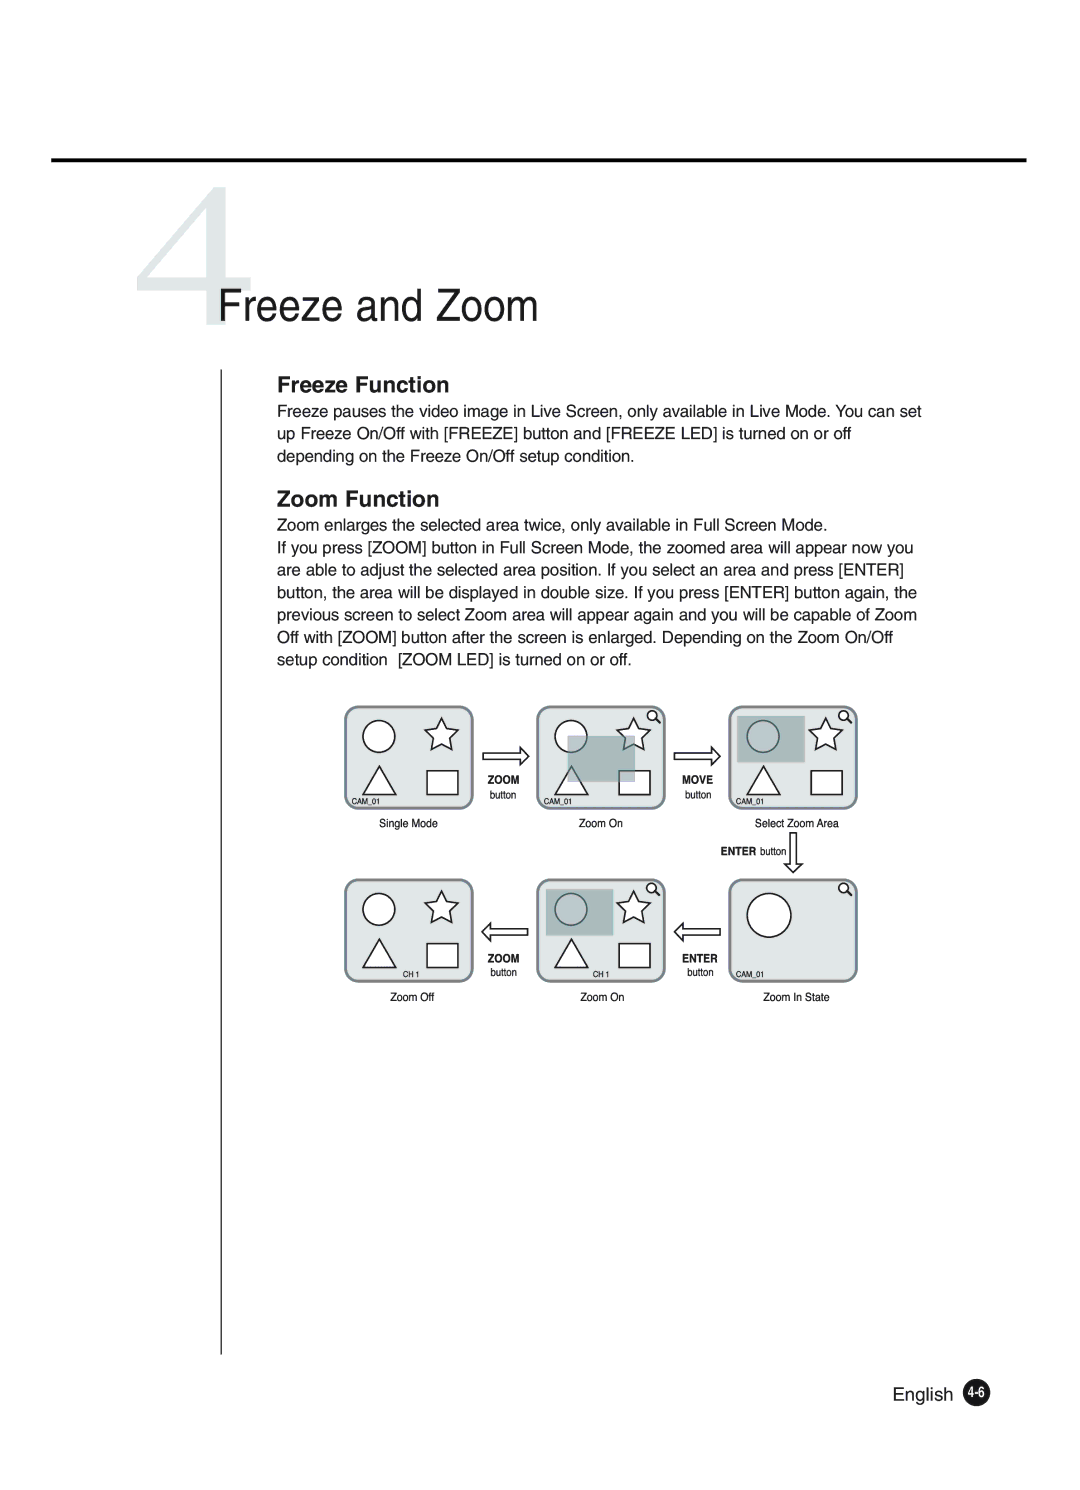 Samsung SHR-4160P manual 4Freeze and Zoom, Freeze Function 